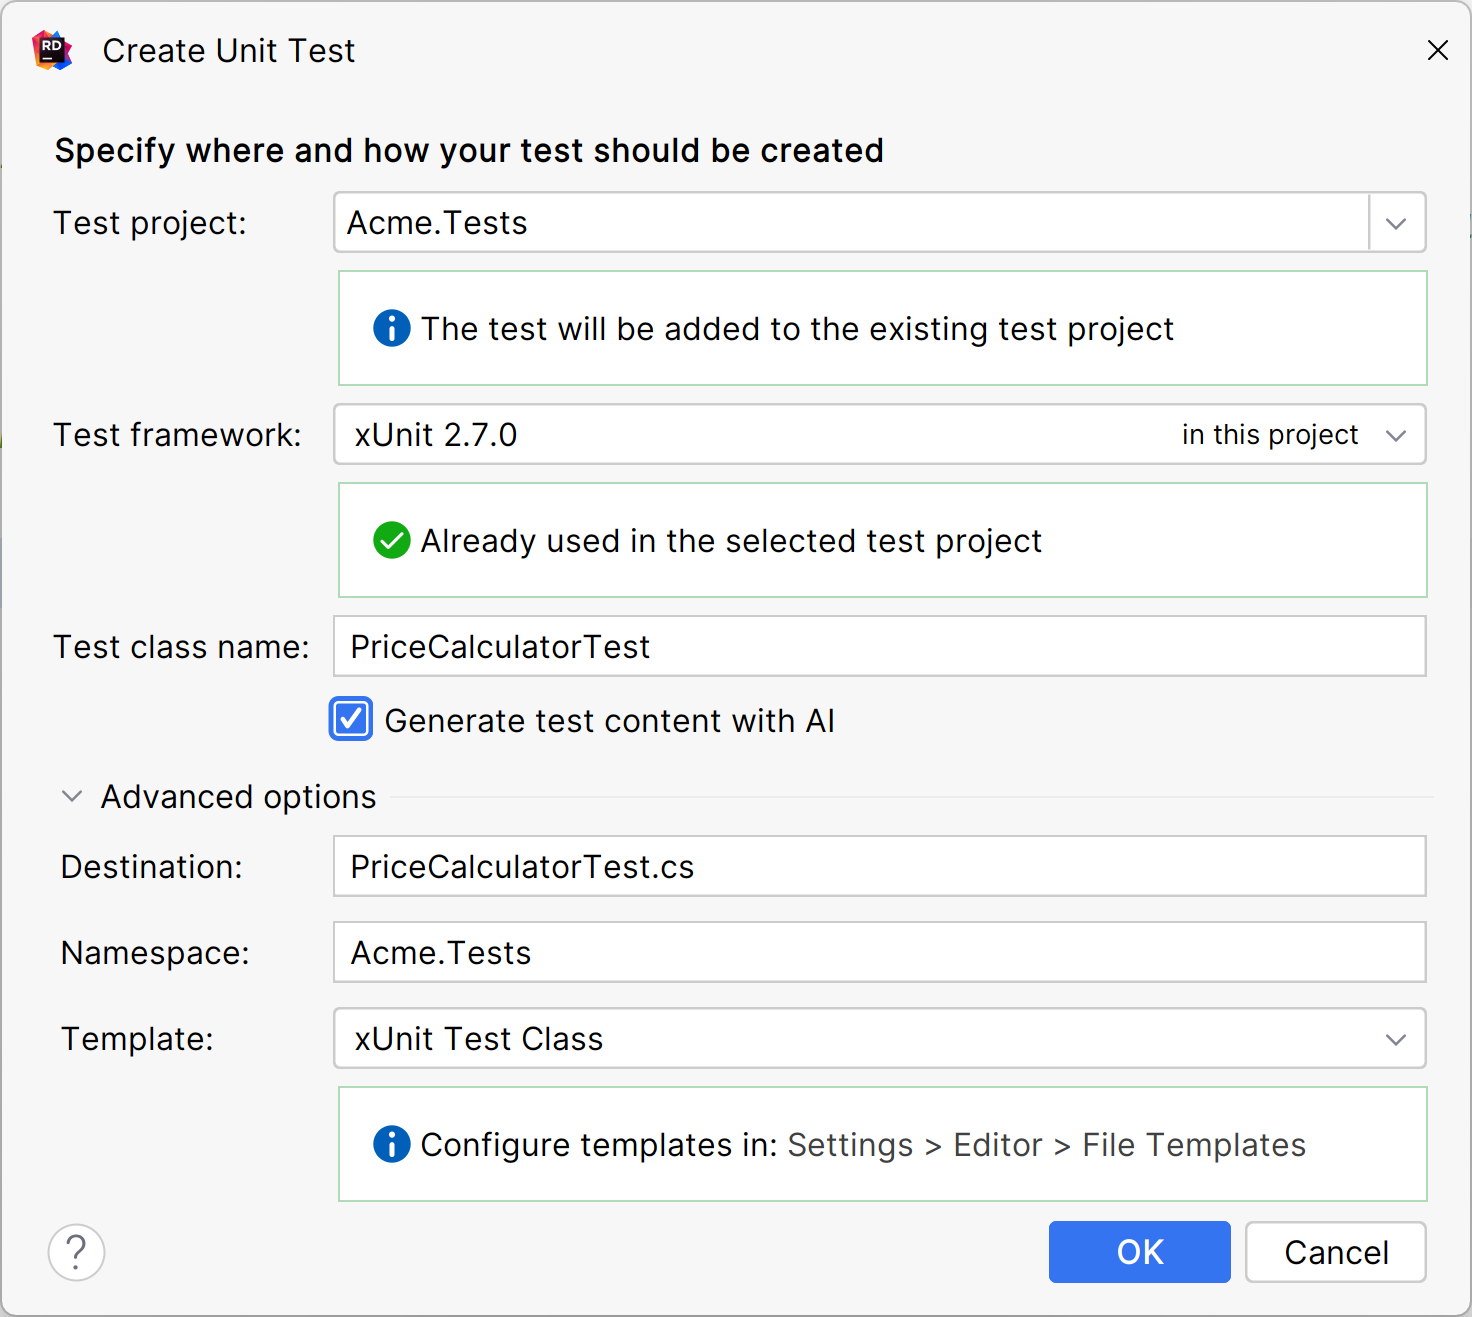 Image of the test generation dialog. Set the test project, framework, and test class names to whatever you choose.